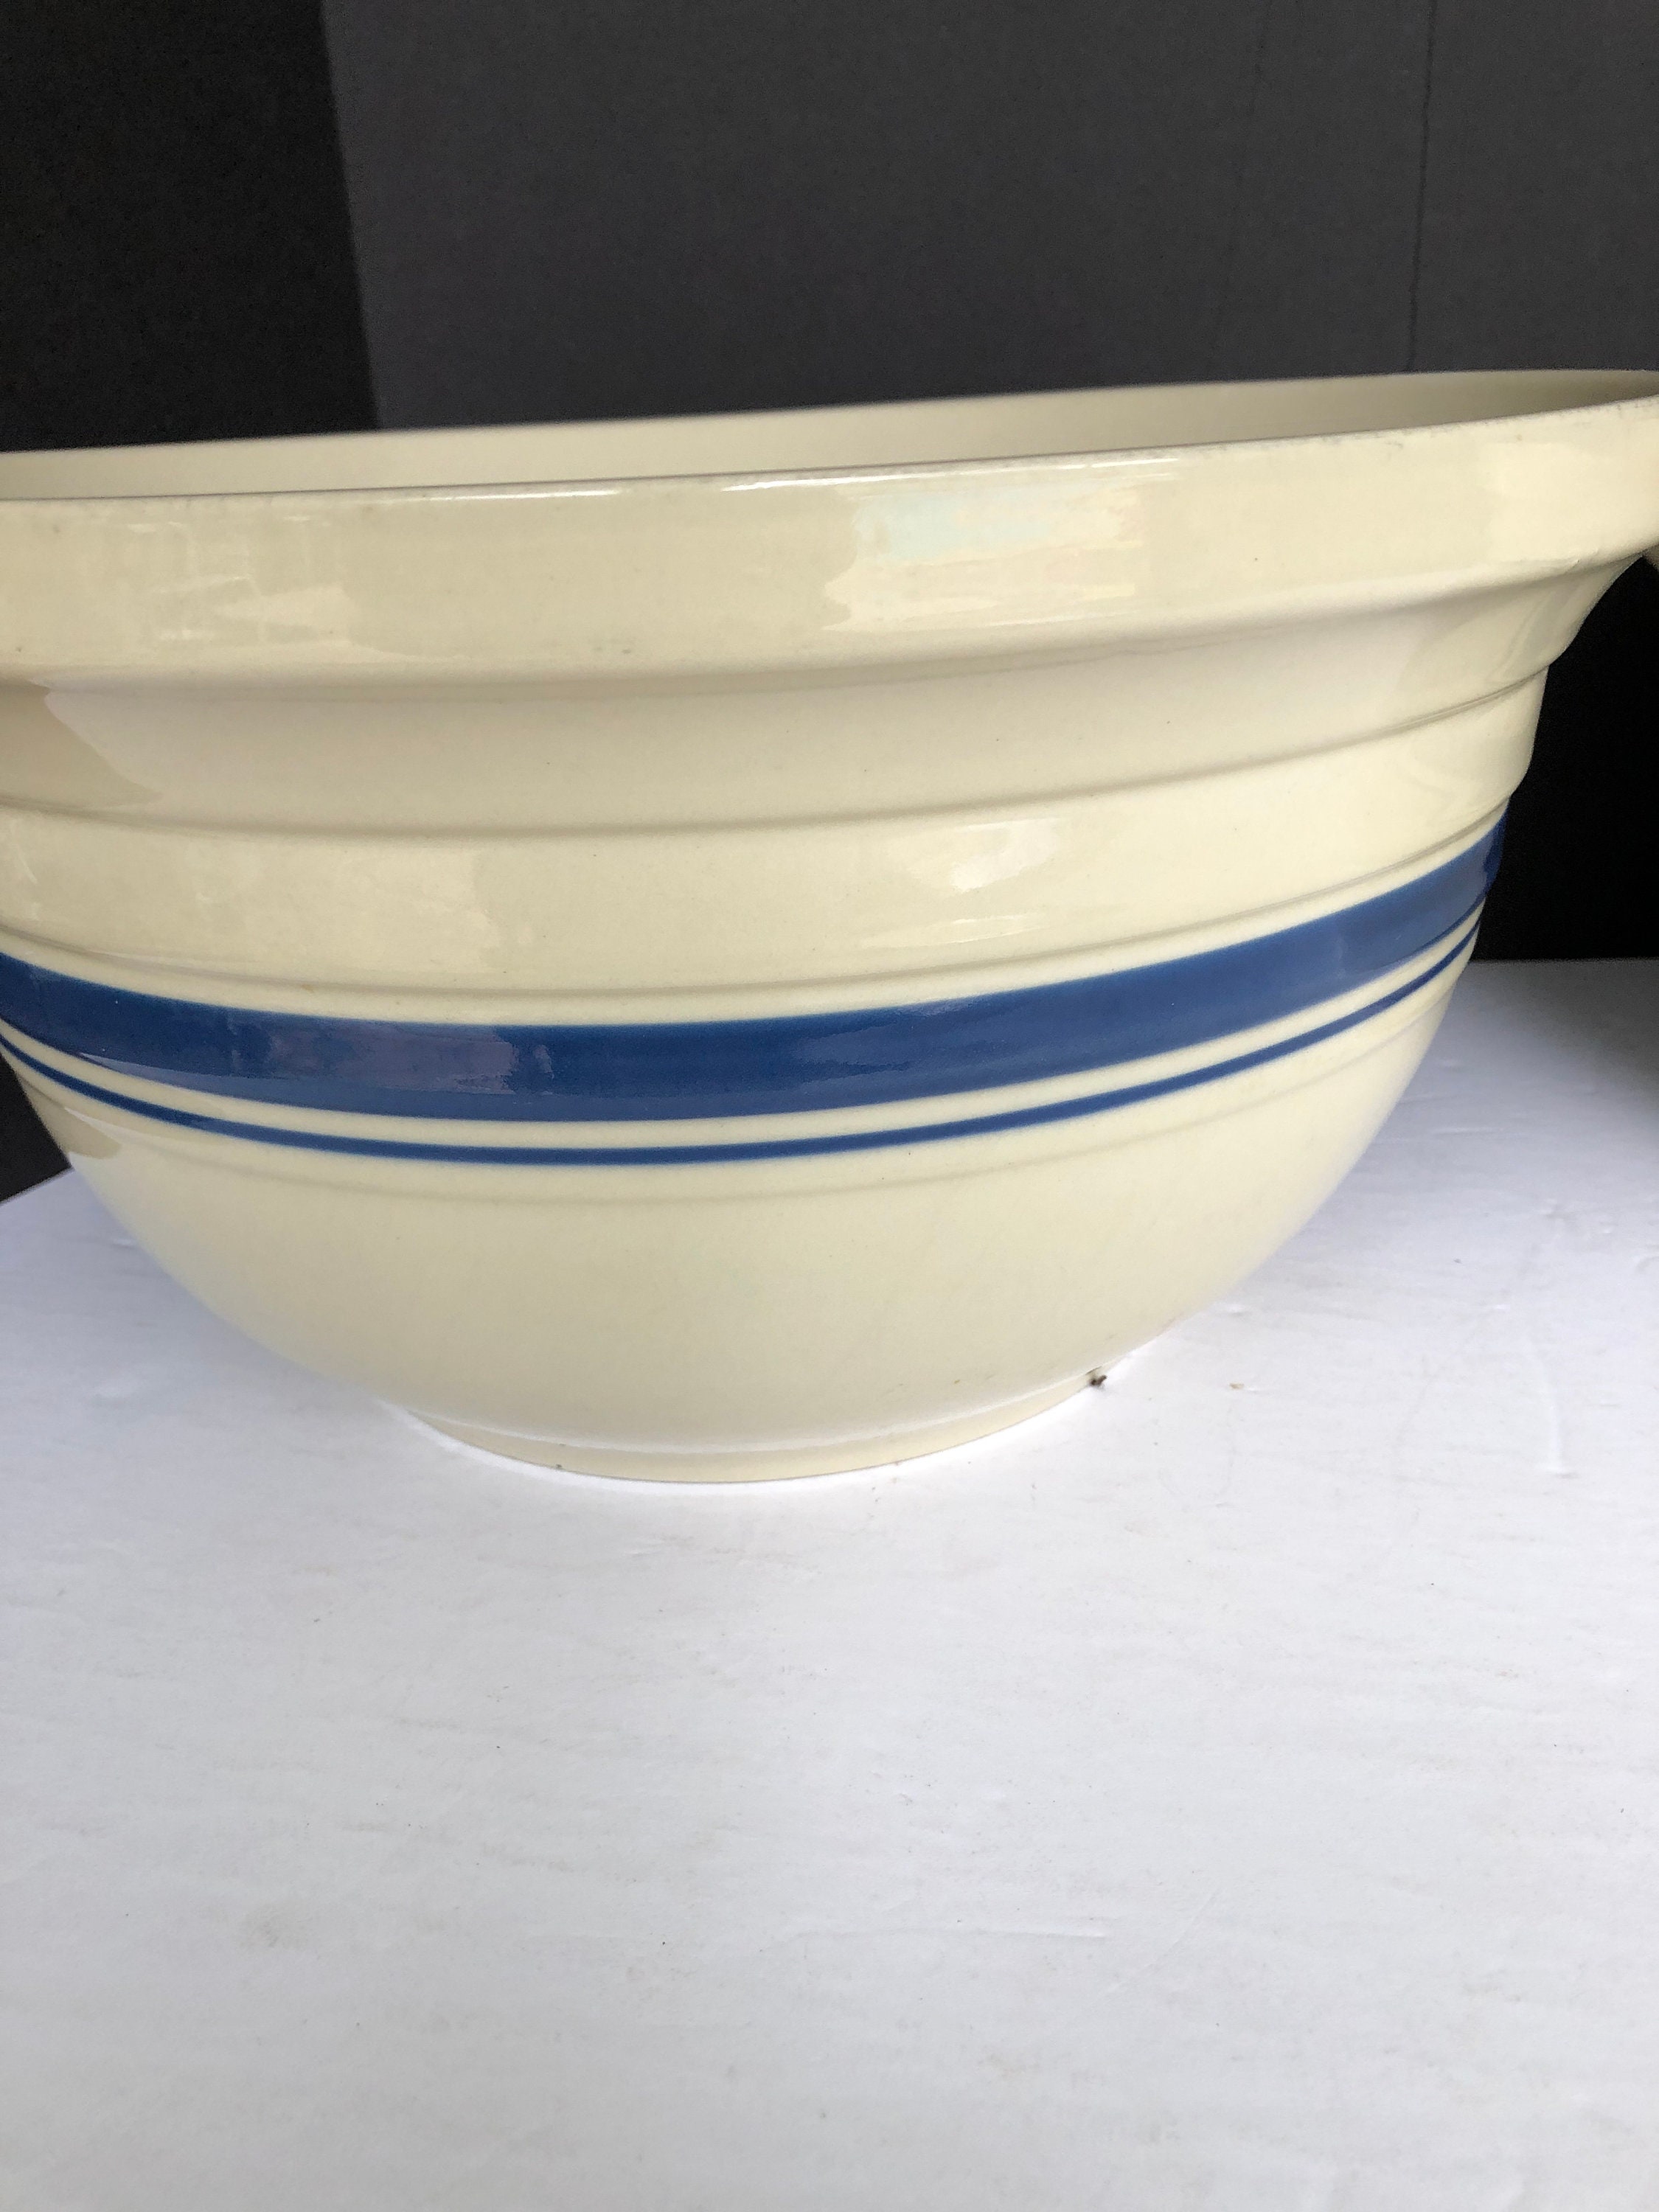 Friendship Bowl Roseville Ohio, 6 and 8 Quart Mixing Bowls, Bread Bowl,  Salad Bowl, Farmhouse Decor, OPEN STOCK, Sold Separately 